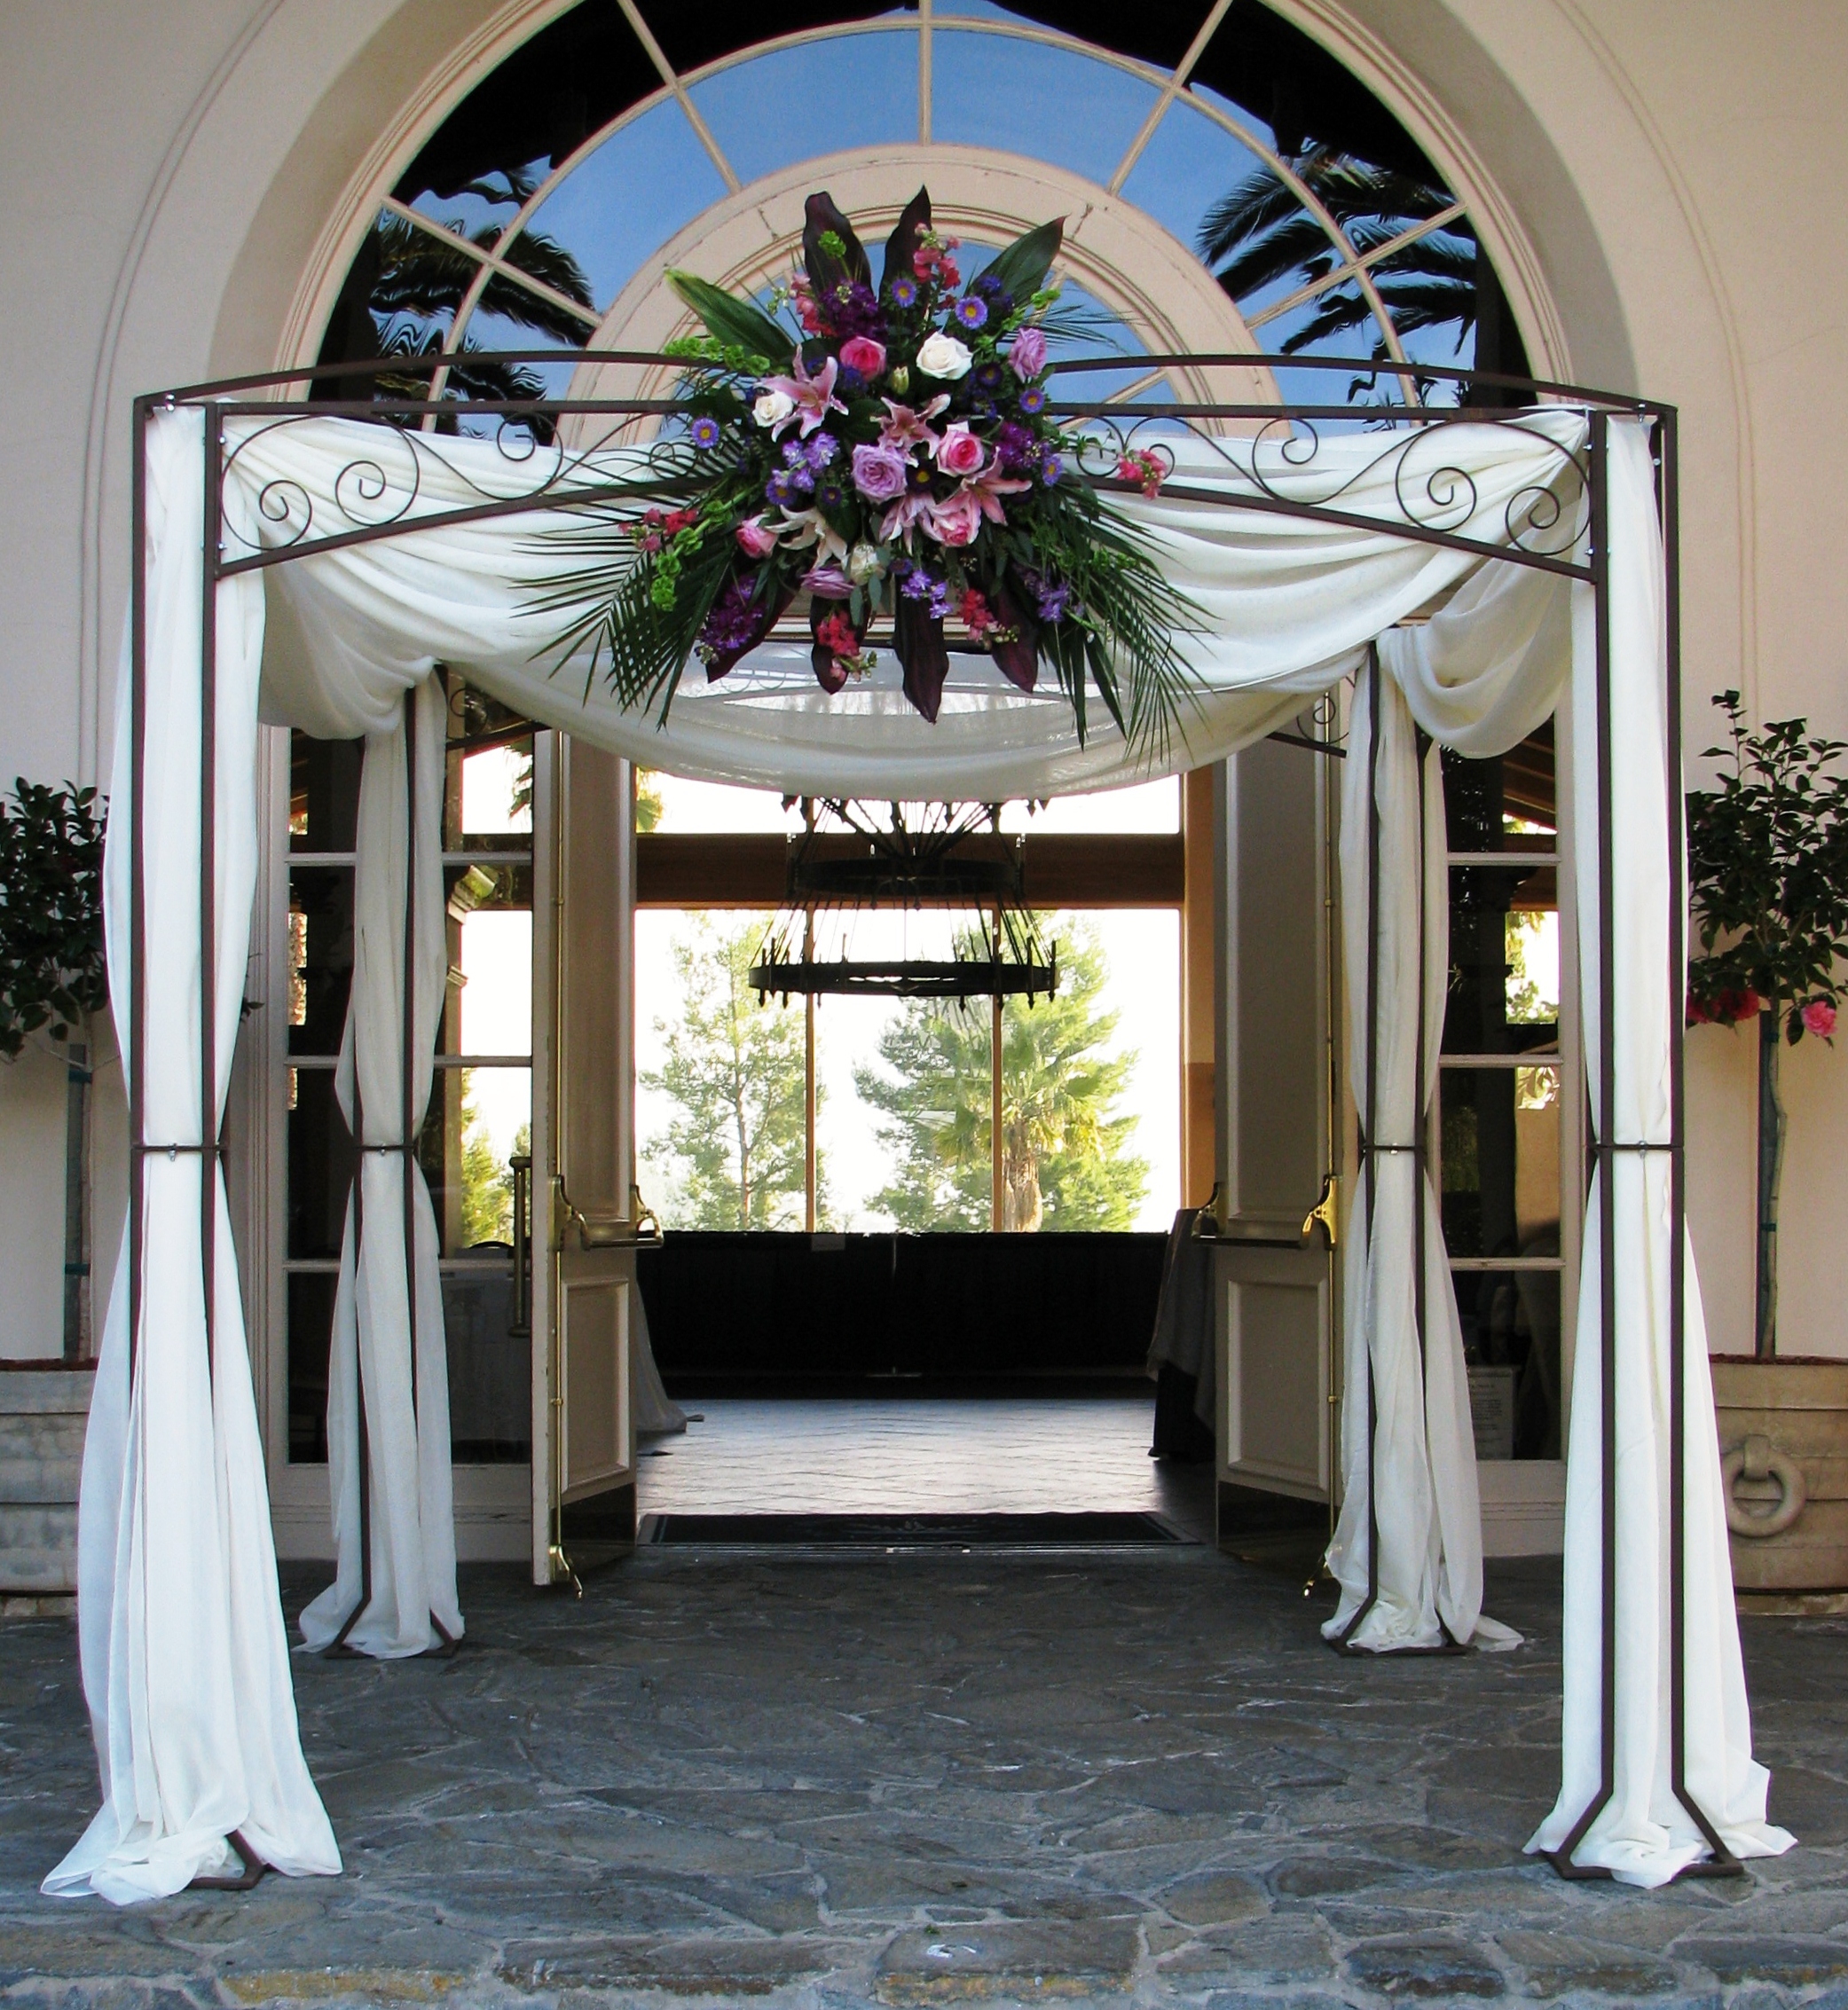 Iron Chuppah with draping and flower